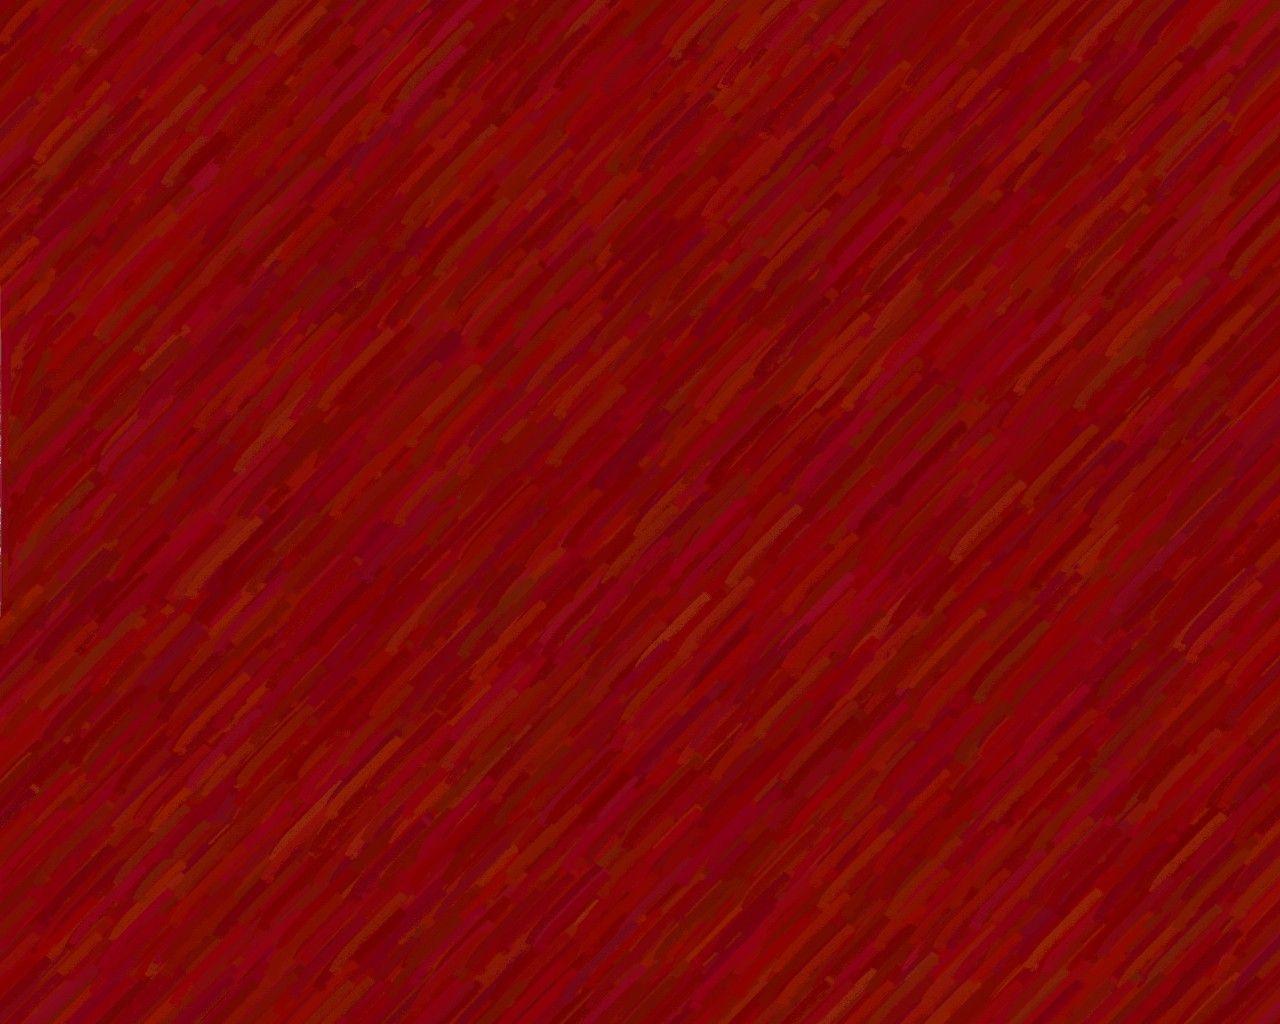 Maroon Colour Backgrounds - Wallpaper Cave